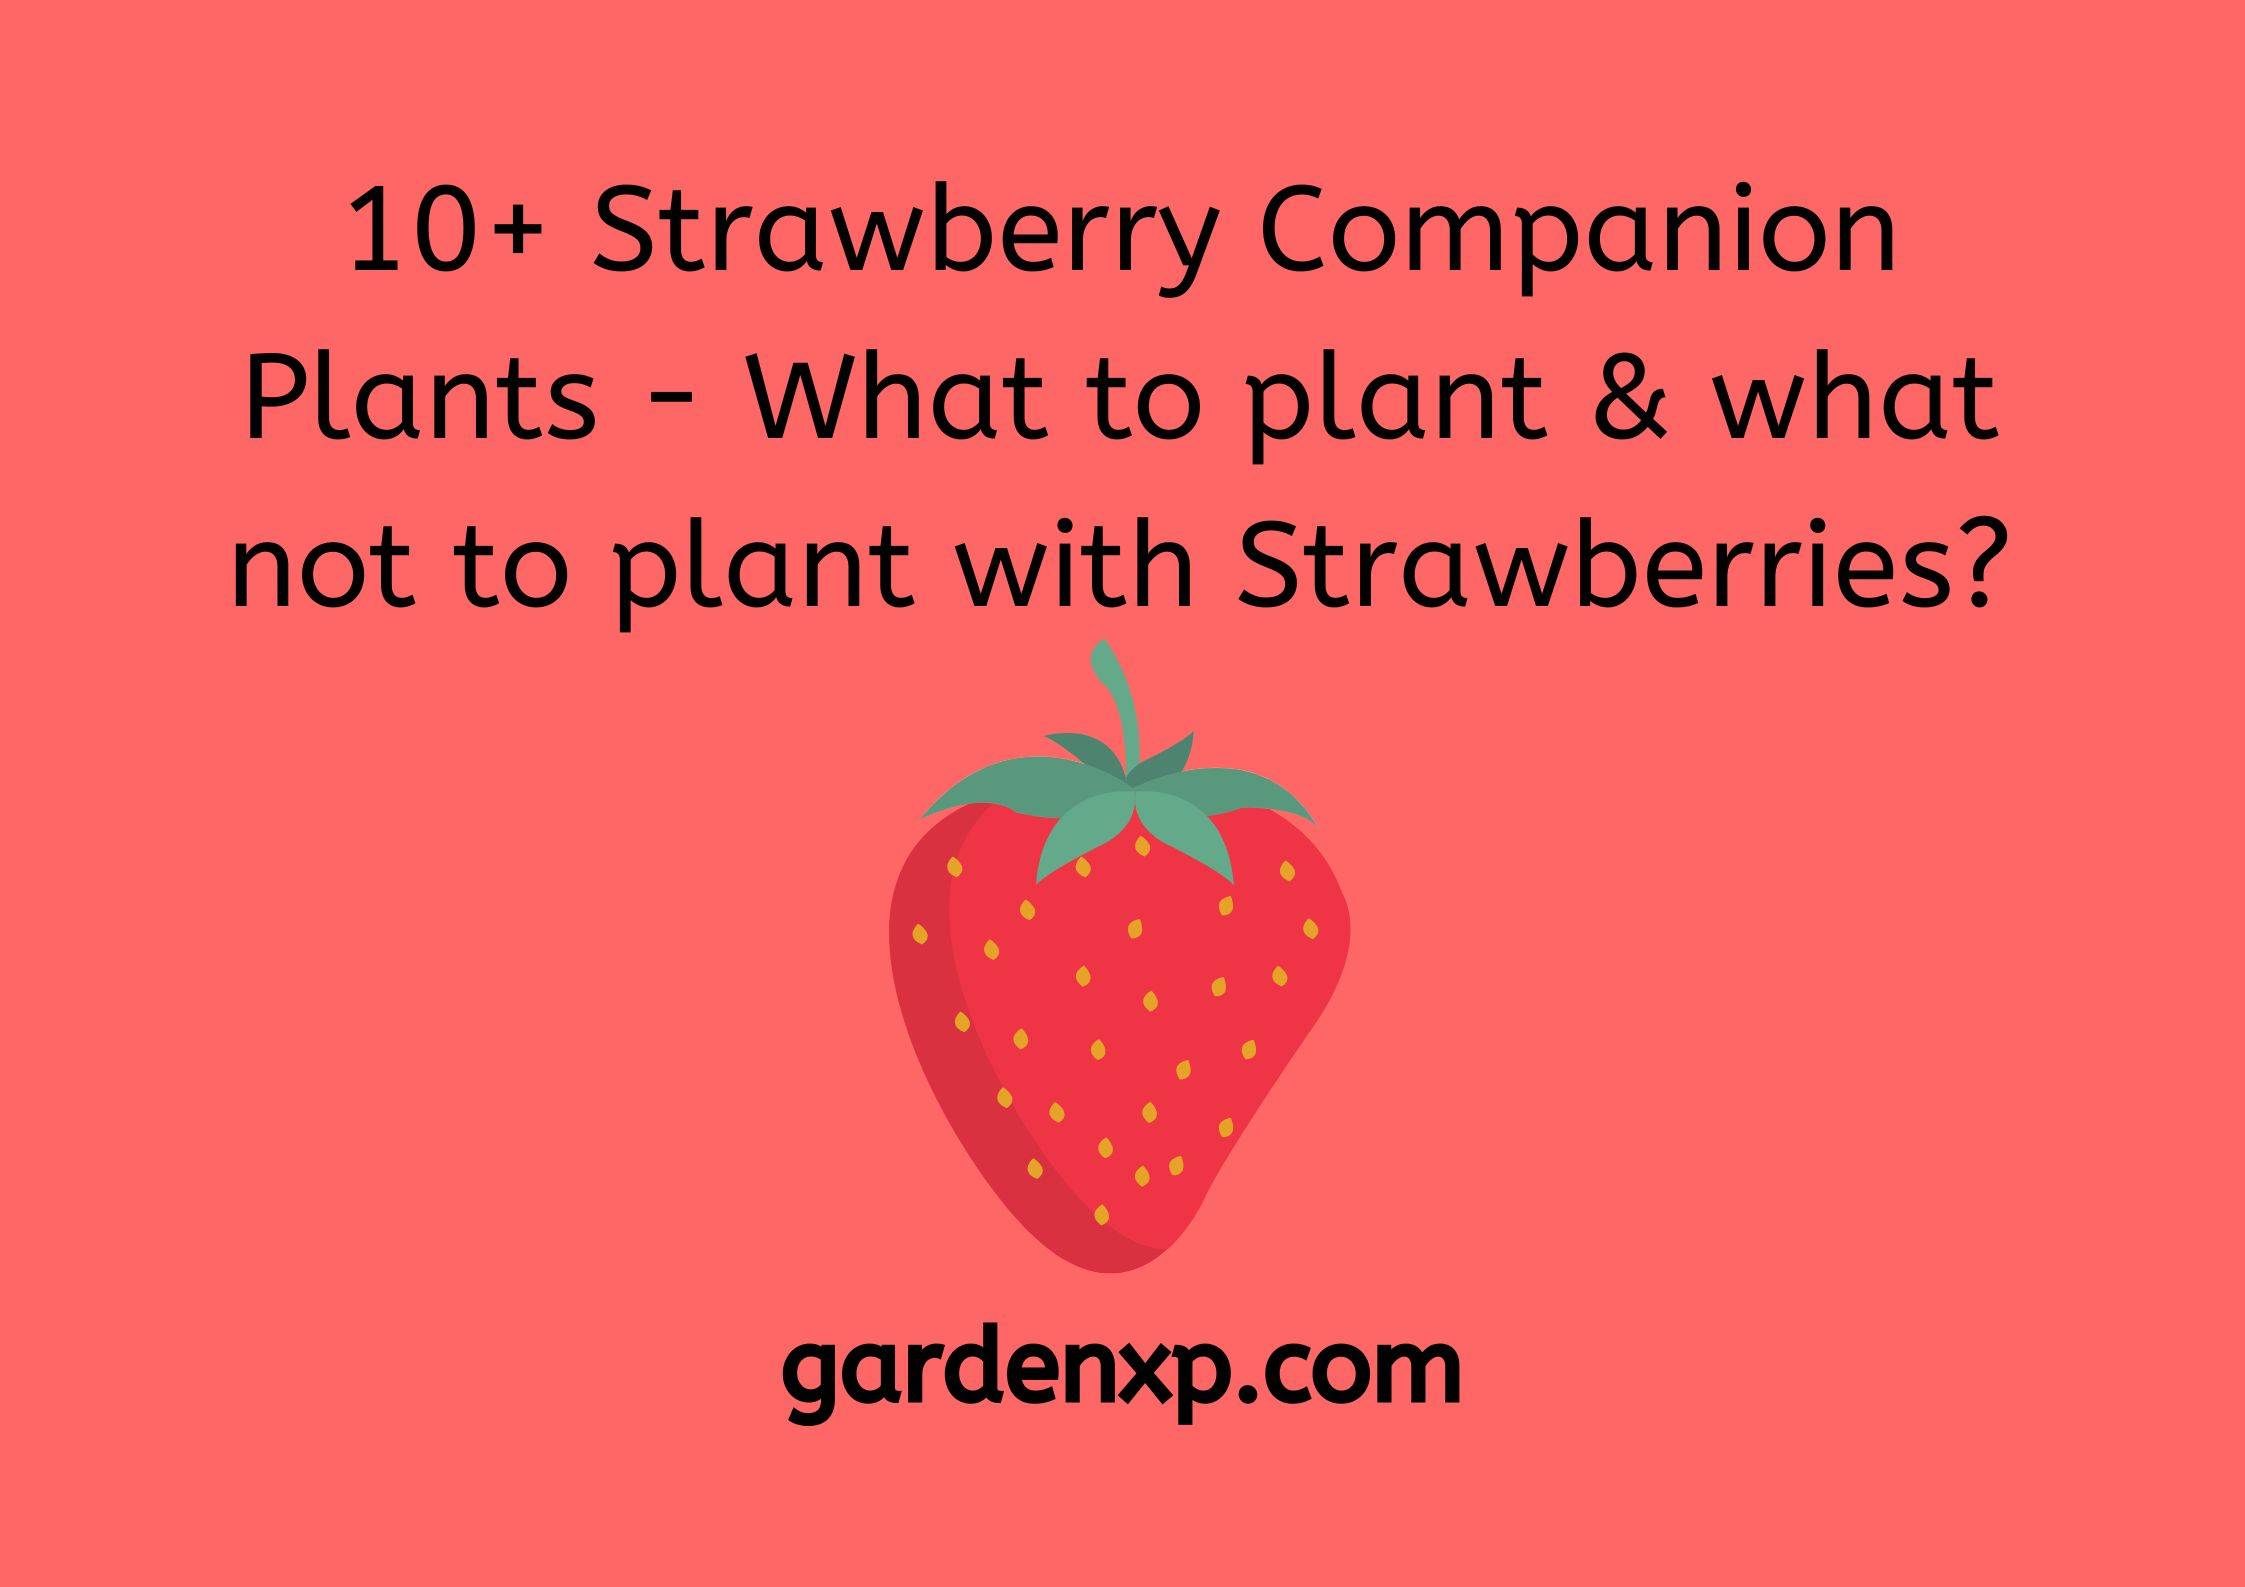 10+ Strawberry Companion Plants - What to plant & what not to plant with Strawberries?